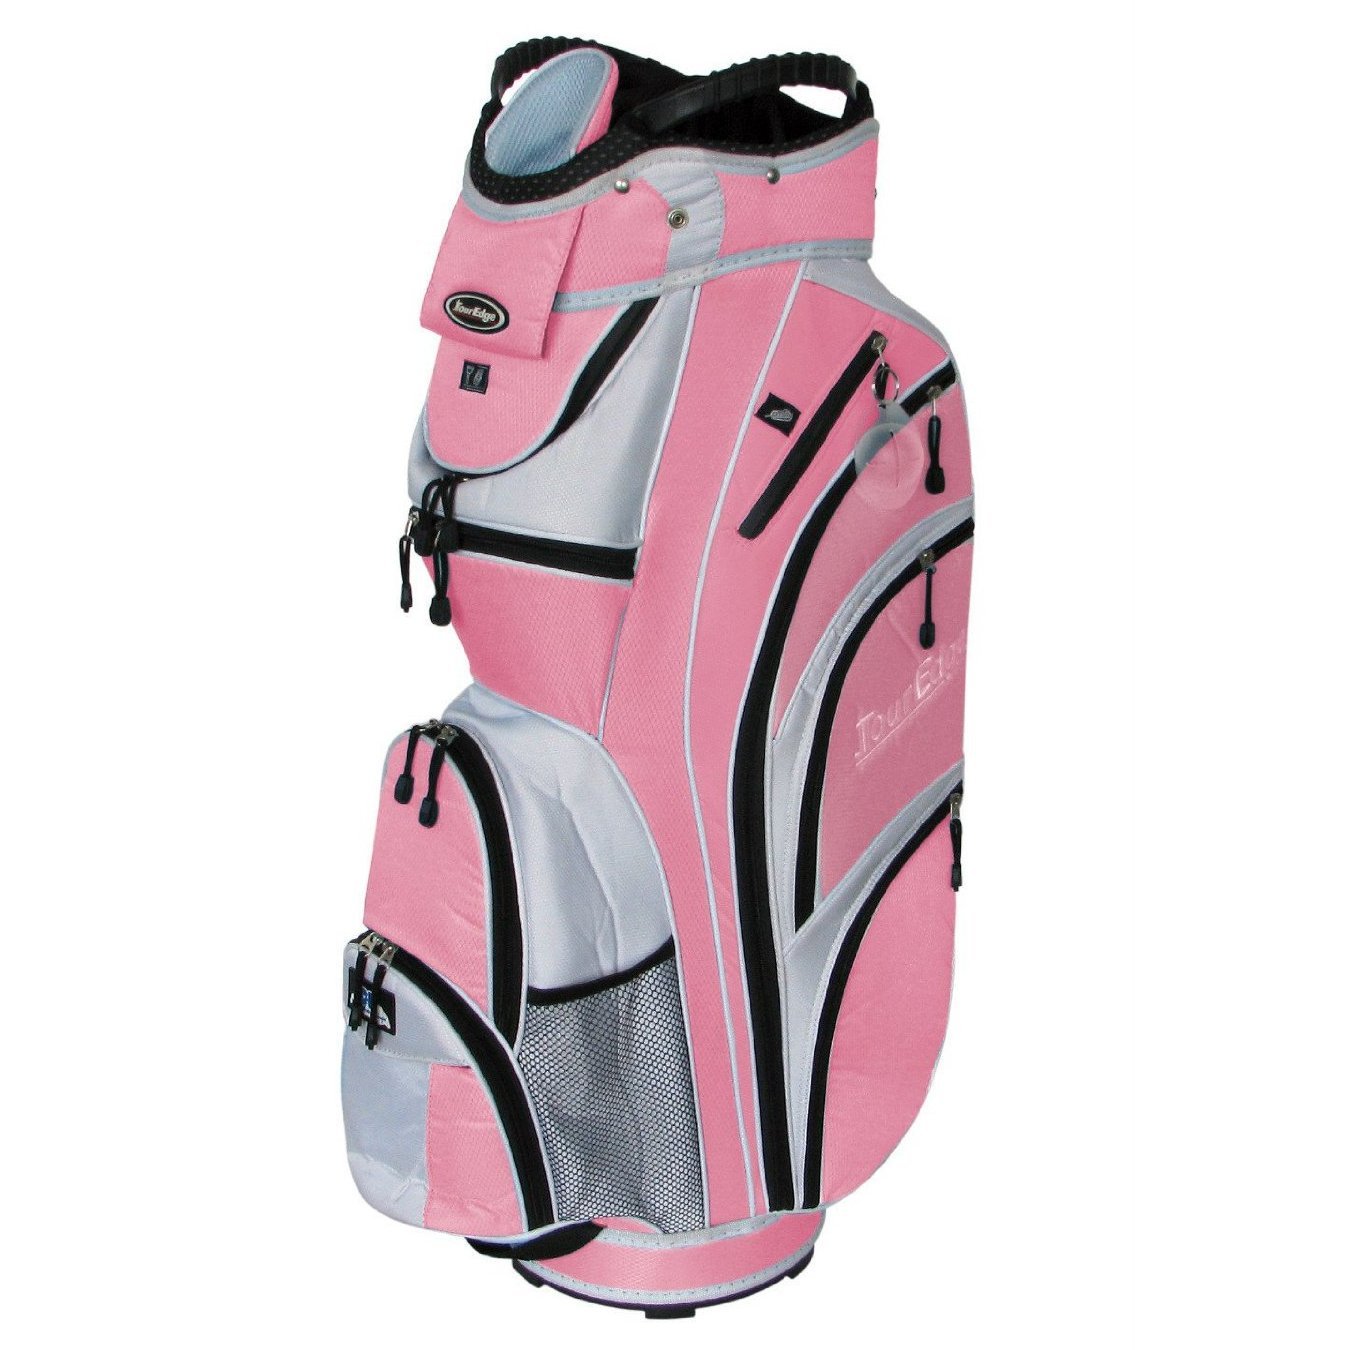 Buy Tour Edge Womens Golf Bags for Best Prices Online!